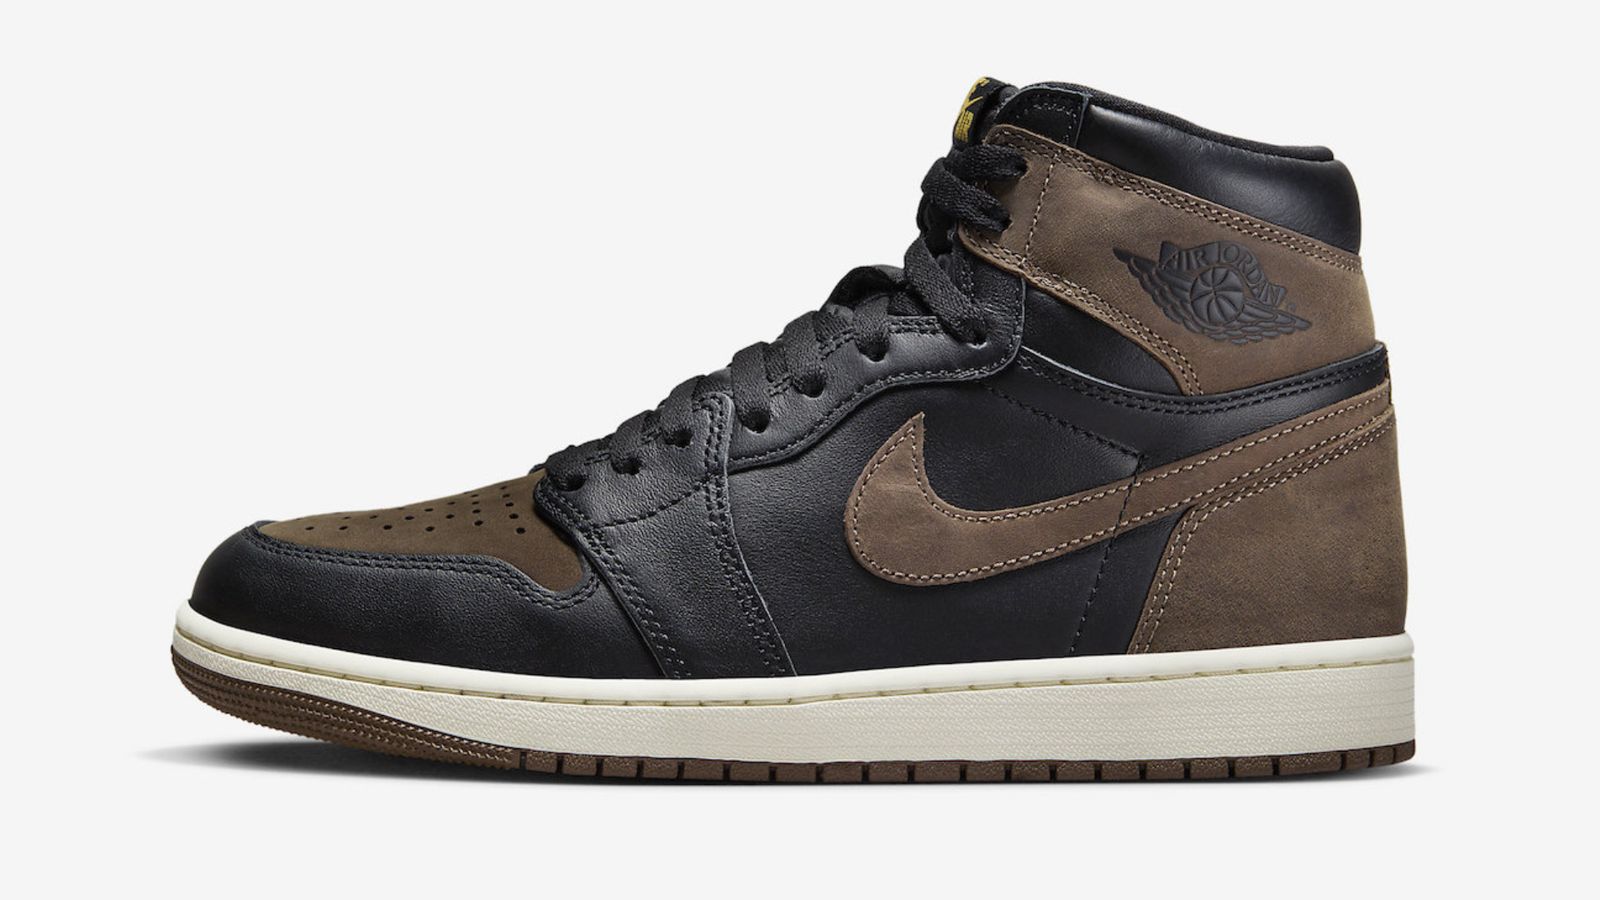 Air Jordan 1 High "Palomino" product image of a black leather and brown nubuck high-top with a cream white midsole.